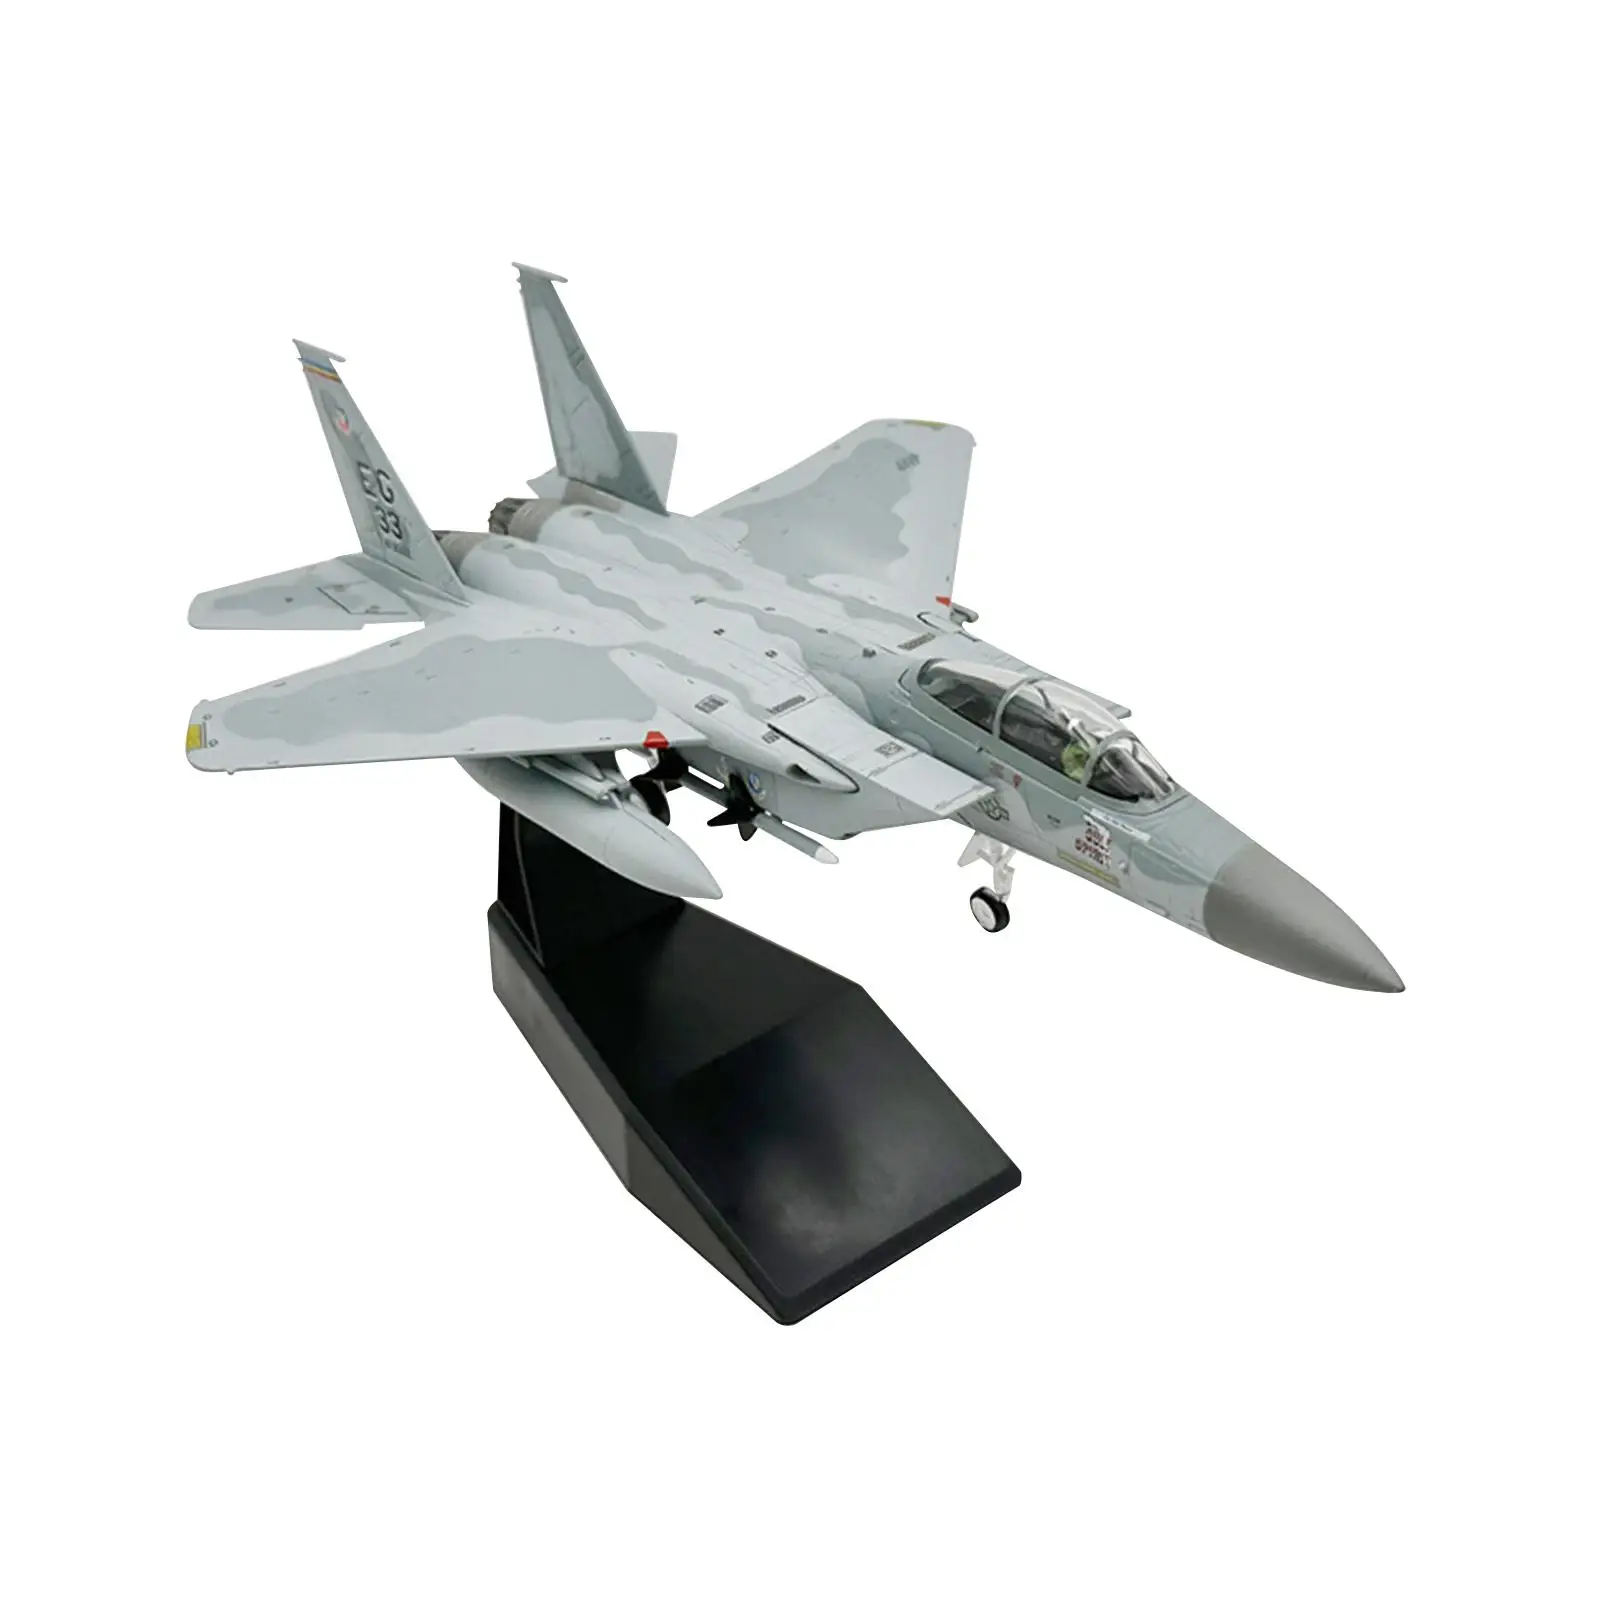 Diecast Plane Model Early Educational Toy Diescast Alloy Aircraft Model for Ornament Collections Gifts Office Decor Adults Gifts